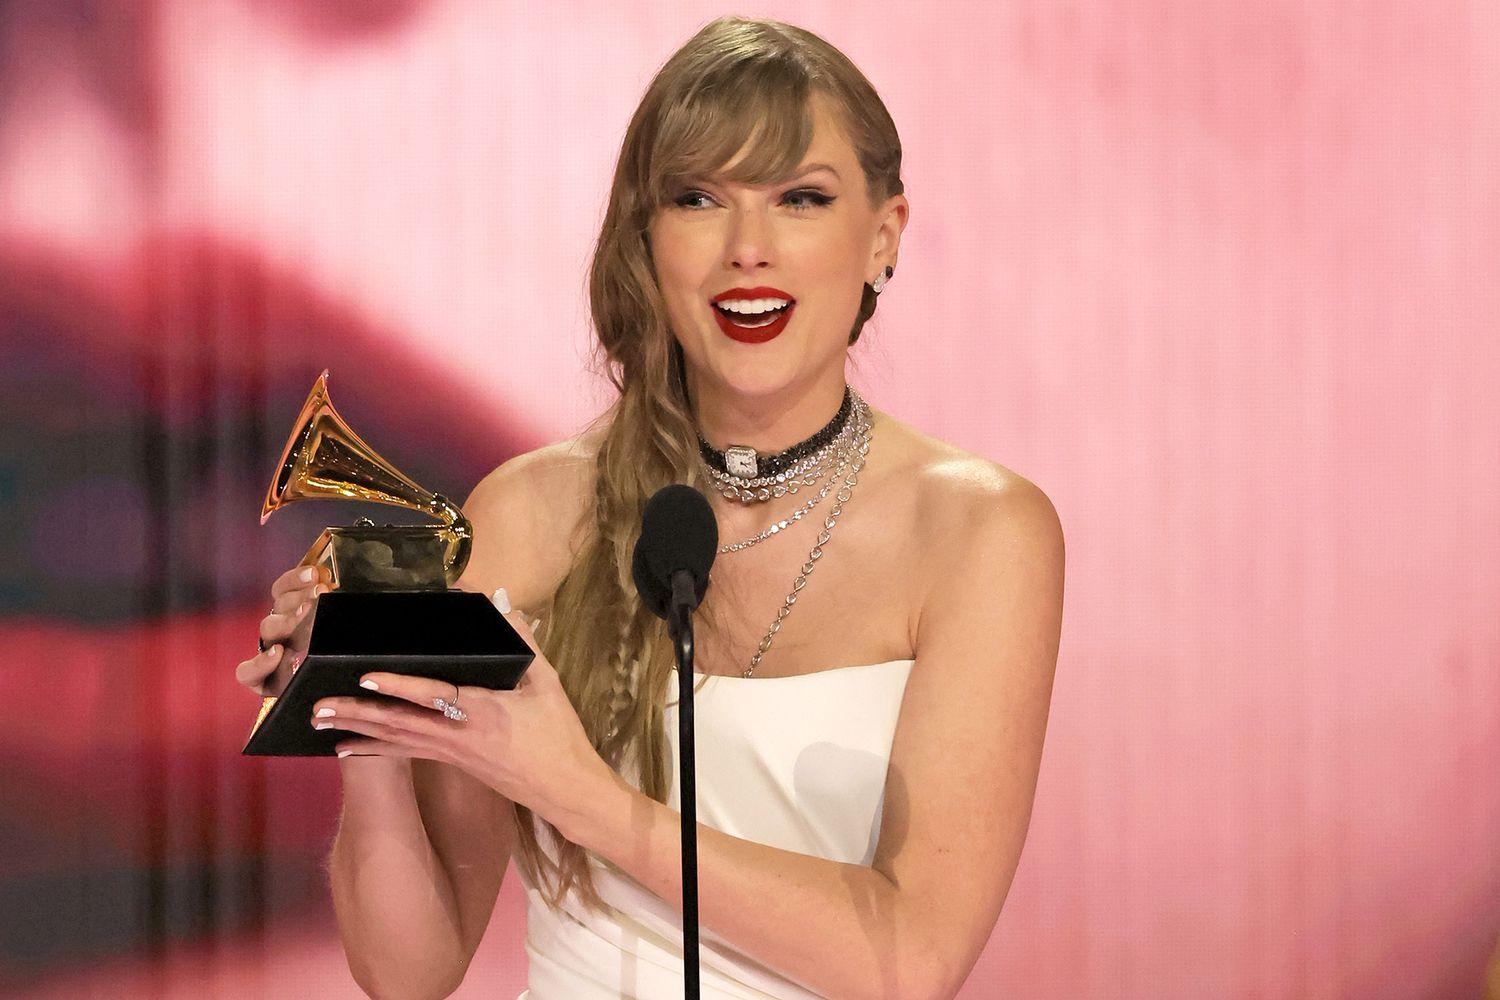 Taylor Swift announced new album at the Grammys only because she won